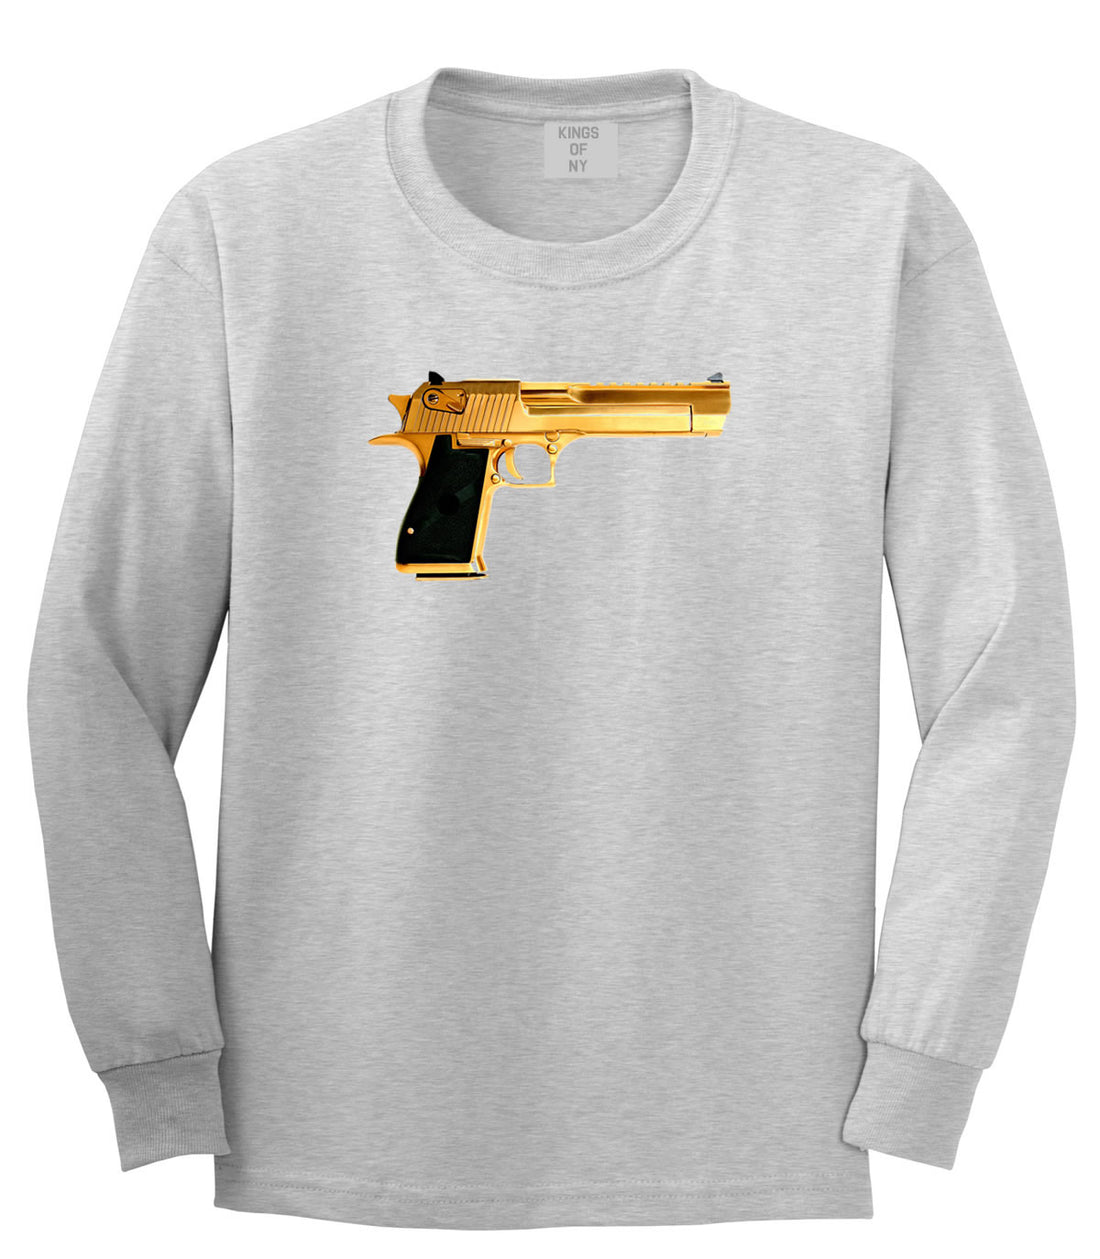 Gold Gun 9mm Revolver Chrome 45 Long Sleeve T-Shirt In Grey by Kings Of NY